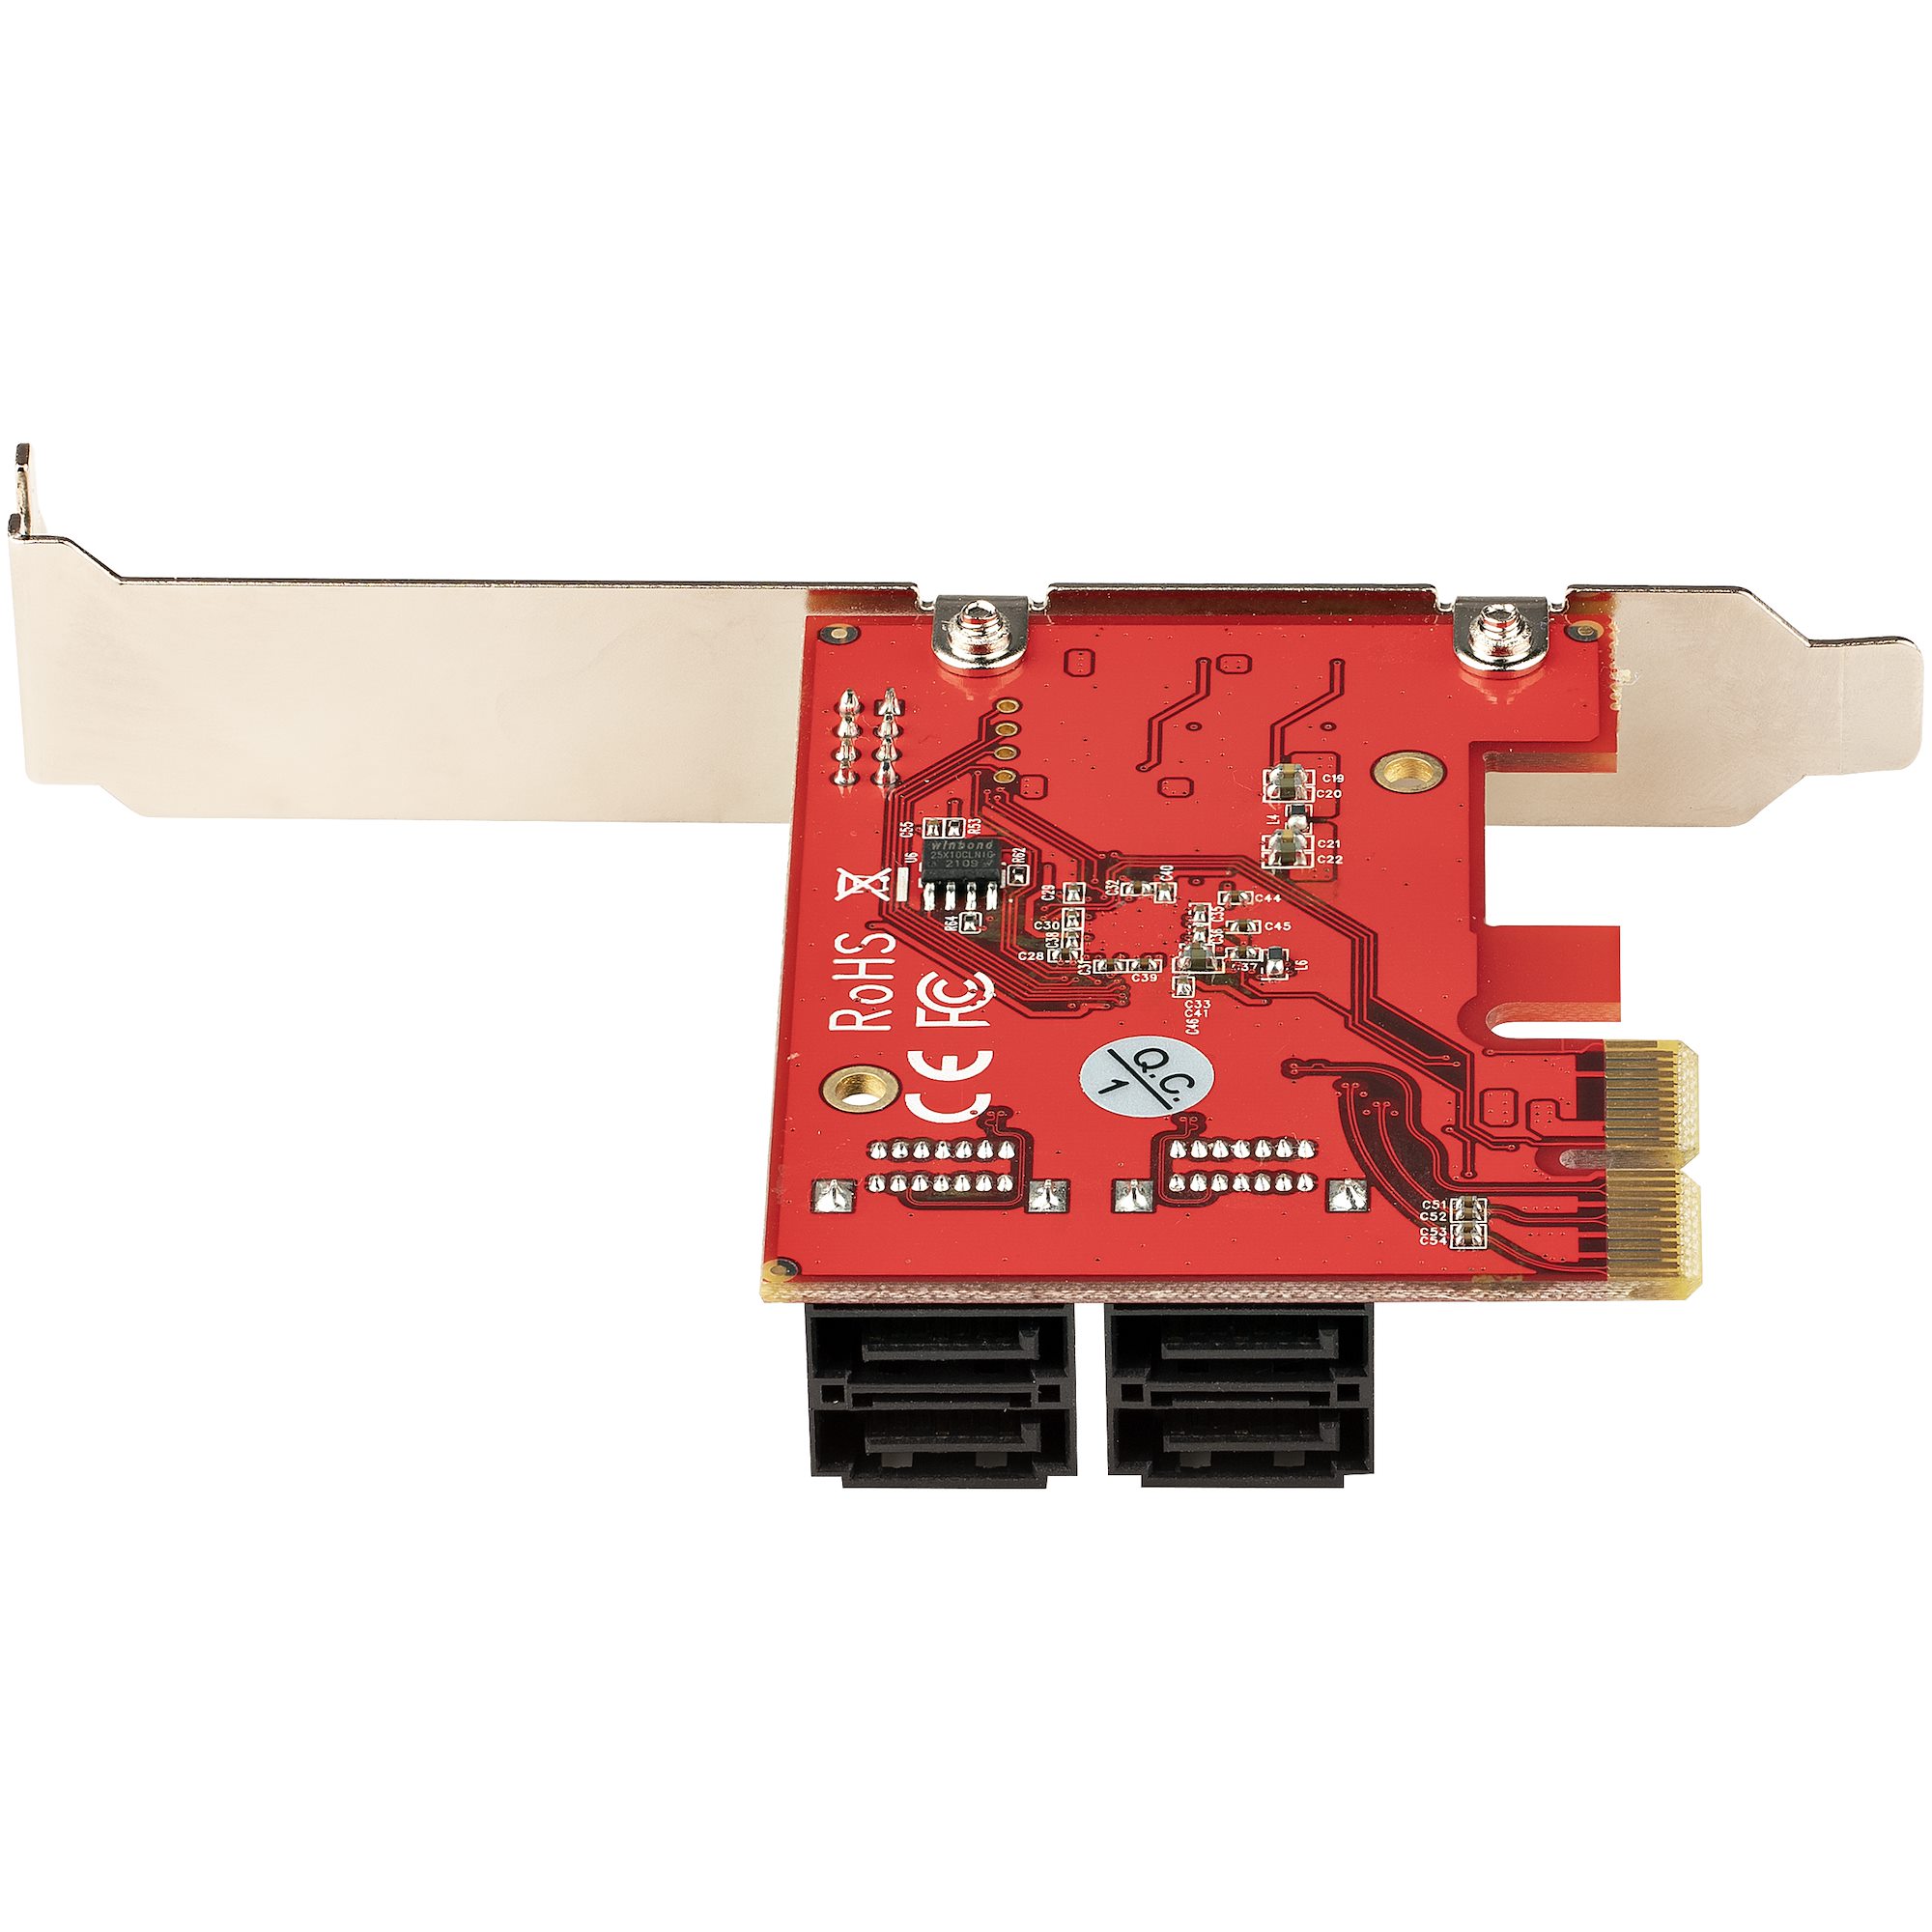 with Low Profile Bracket and 6 SATA Cables Plug and Play Supports HDDS ASM1166 Chip 6 Gbps SATA 3.0 PCIe Expansion Card PCI Express 6 Ports 4X Card Non-Raid 